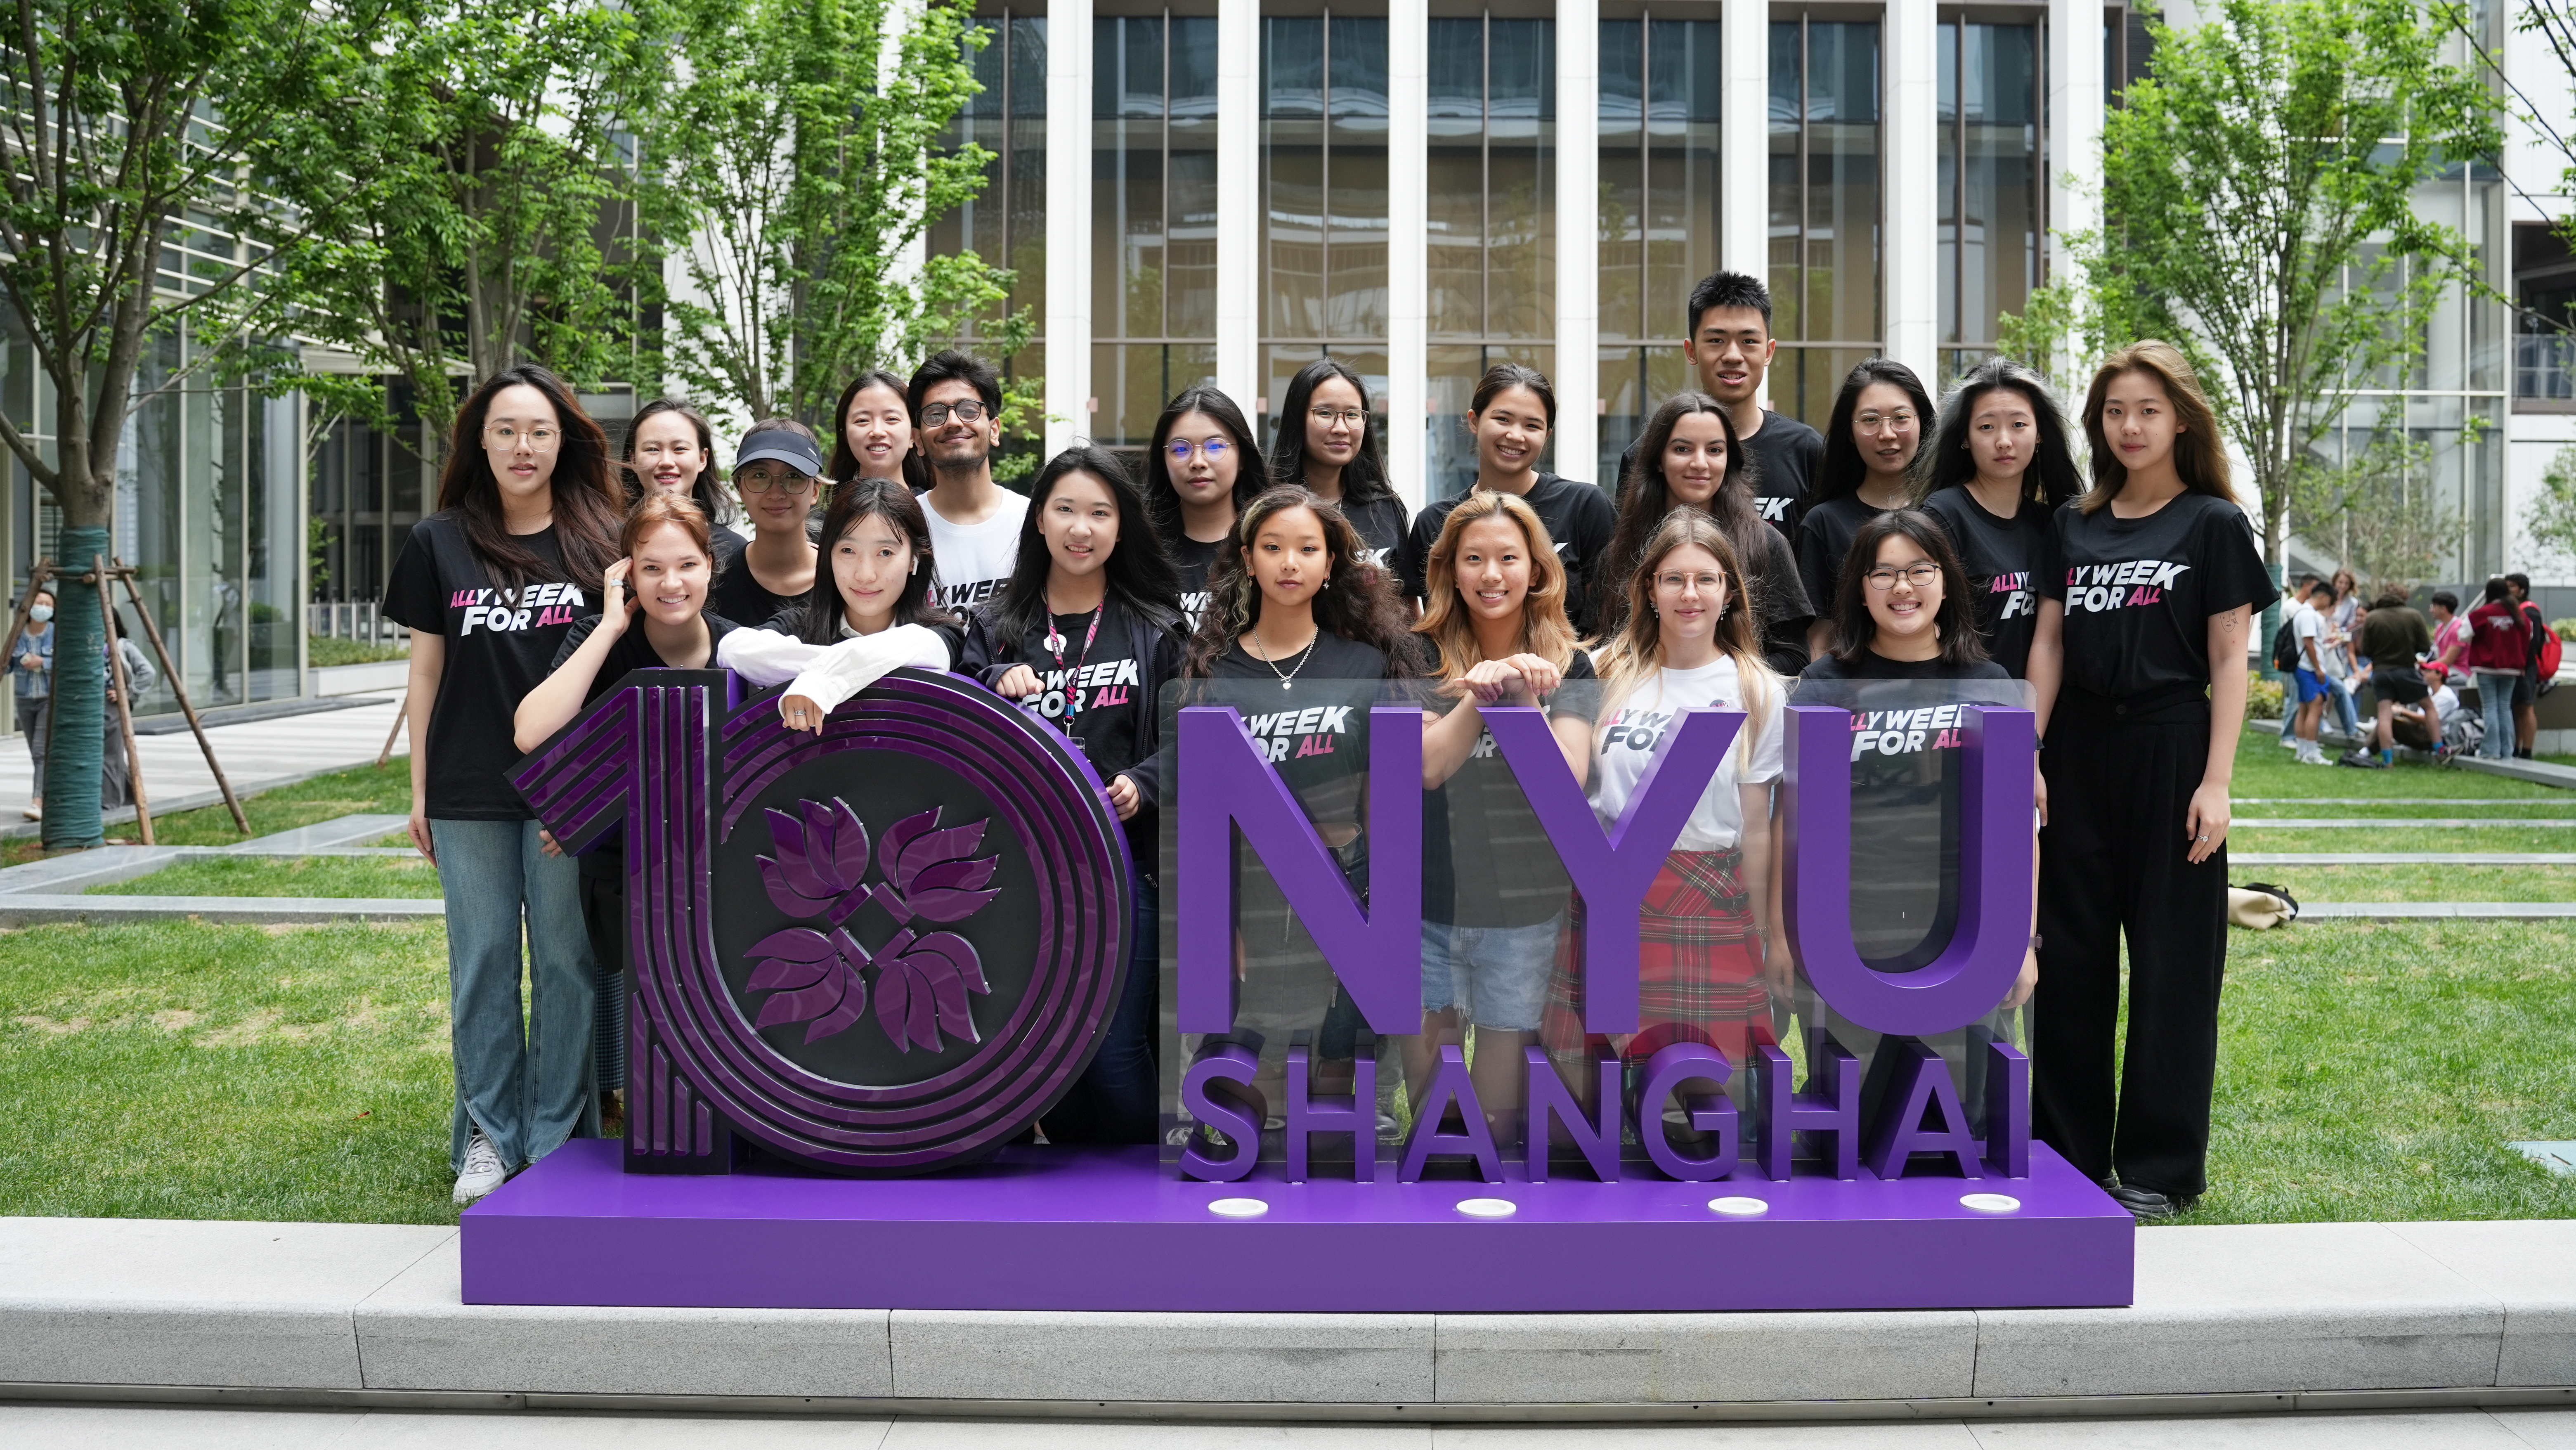 Students wearing "Ally Week for All" shirts pose with an NYU Shanghai sign